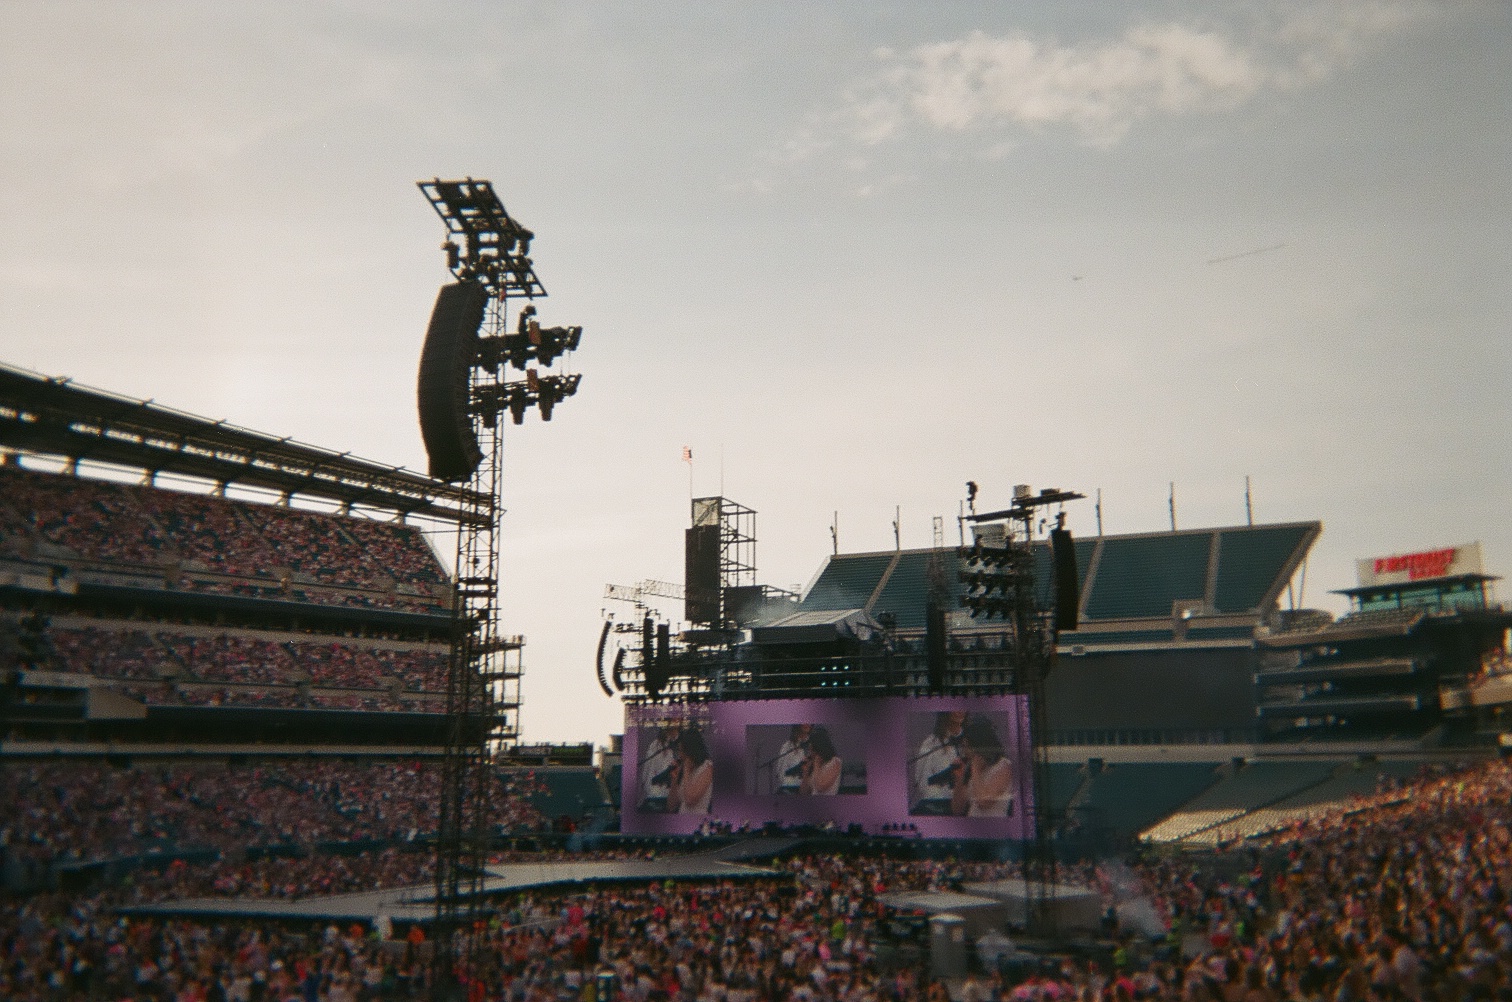 Stage with Gracie Abrams on the screen and a crowd filling the stadium.